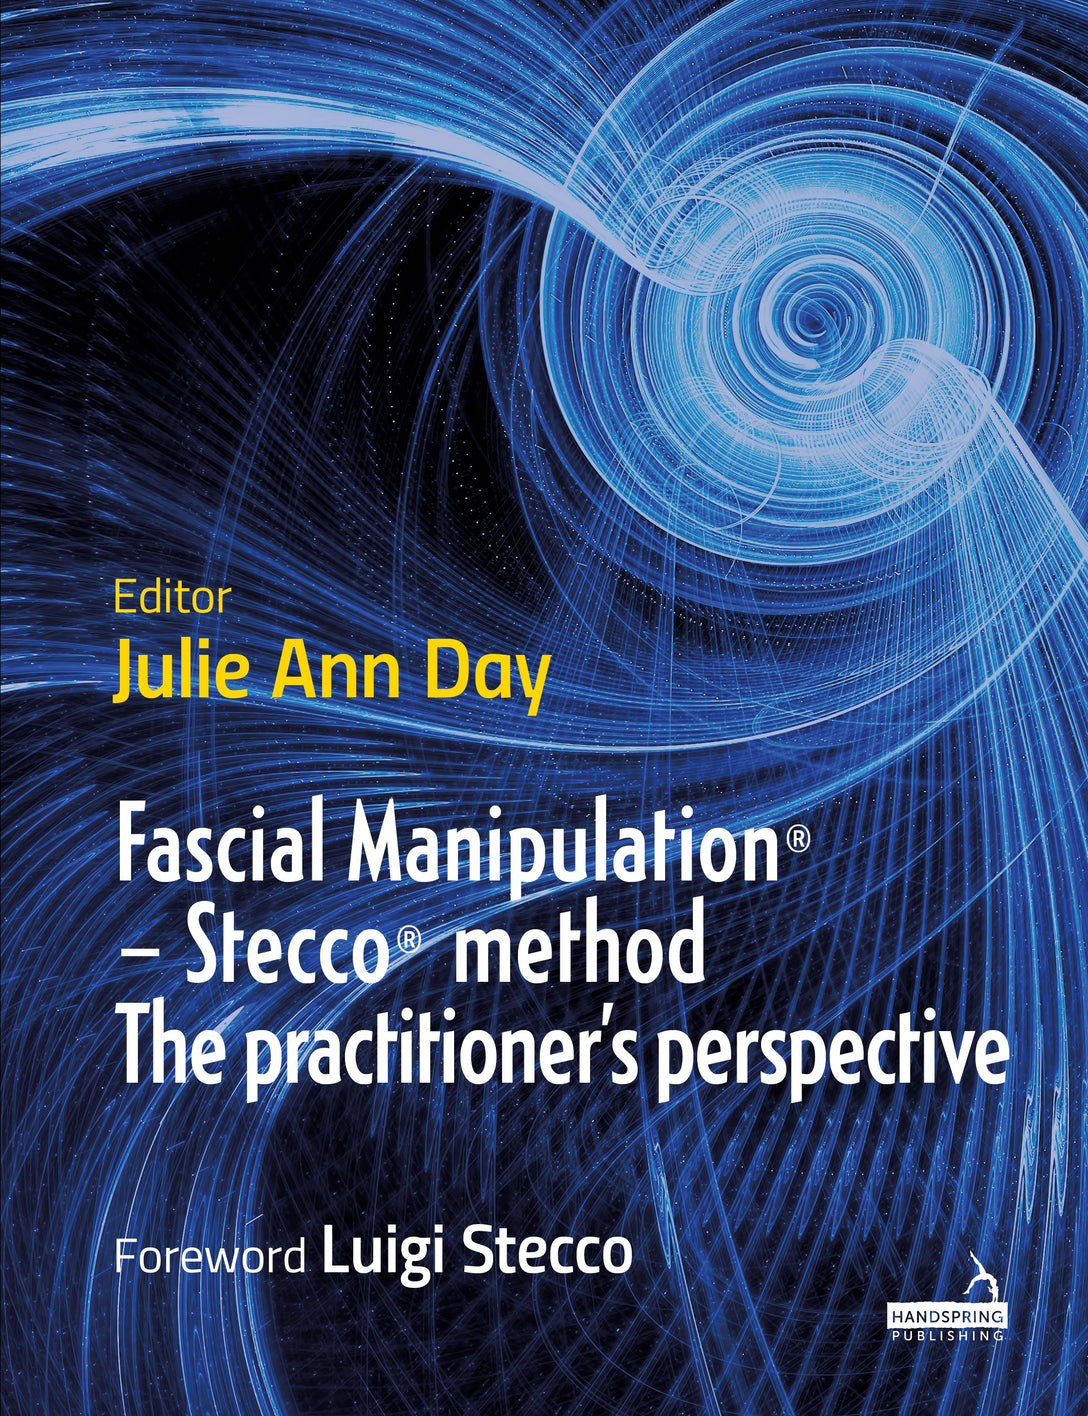 Fascial Manipulation® - Stecco® method The practitioner's perspective by Julie Ann Day